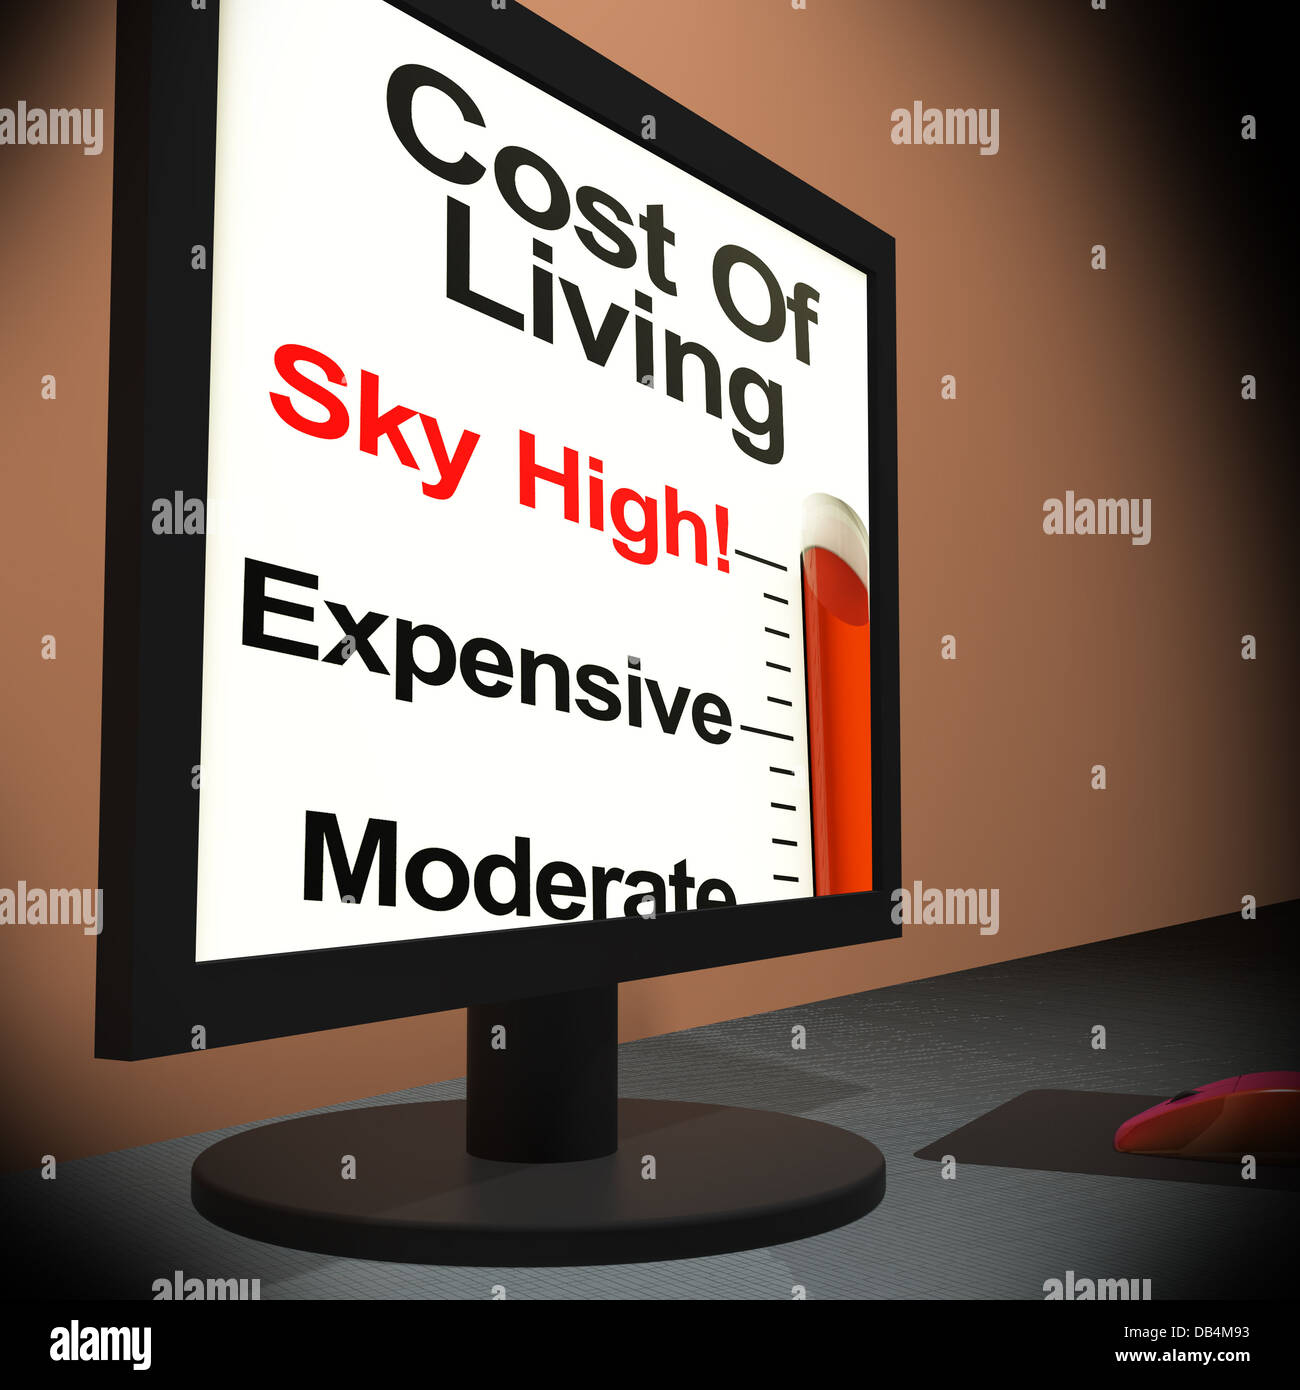 Cost Of Living On Monitor Showing Budget Stock Photo